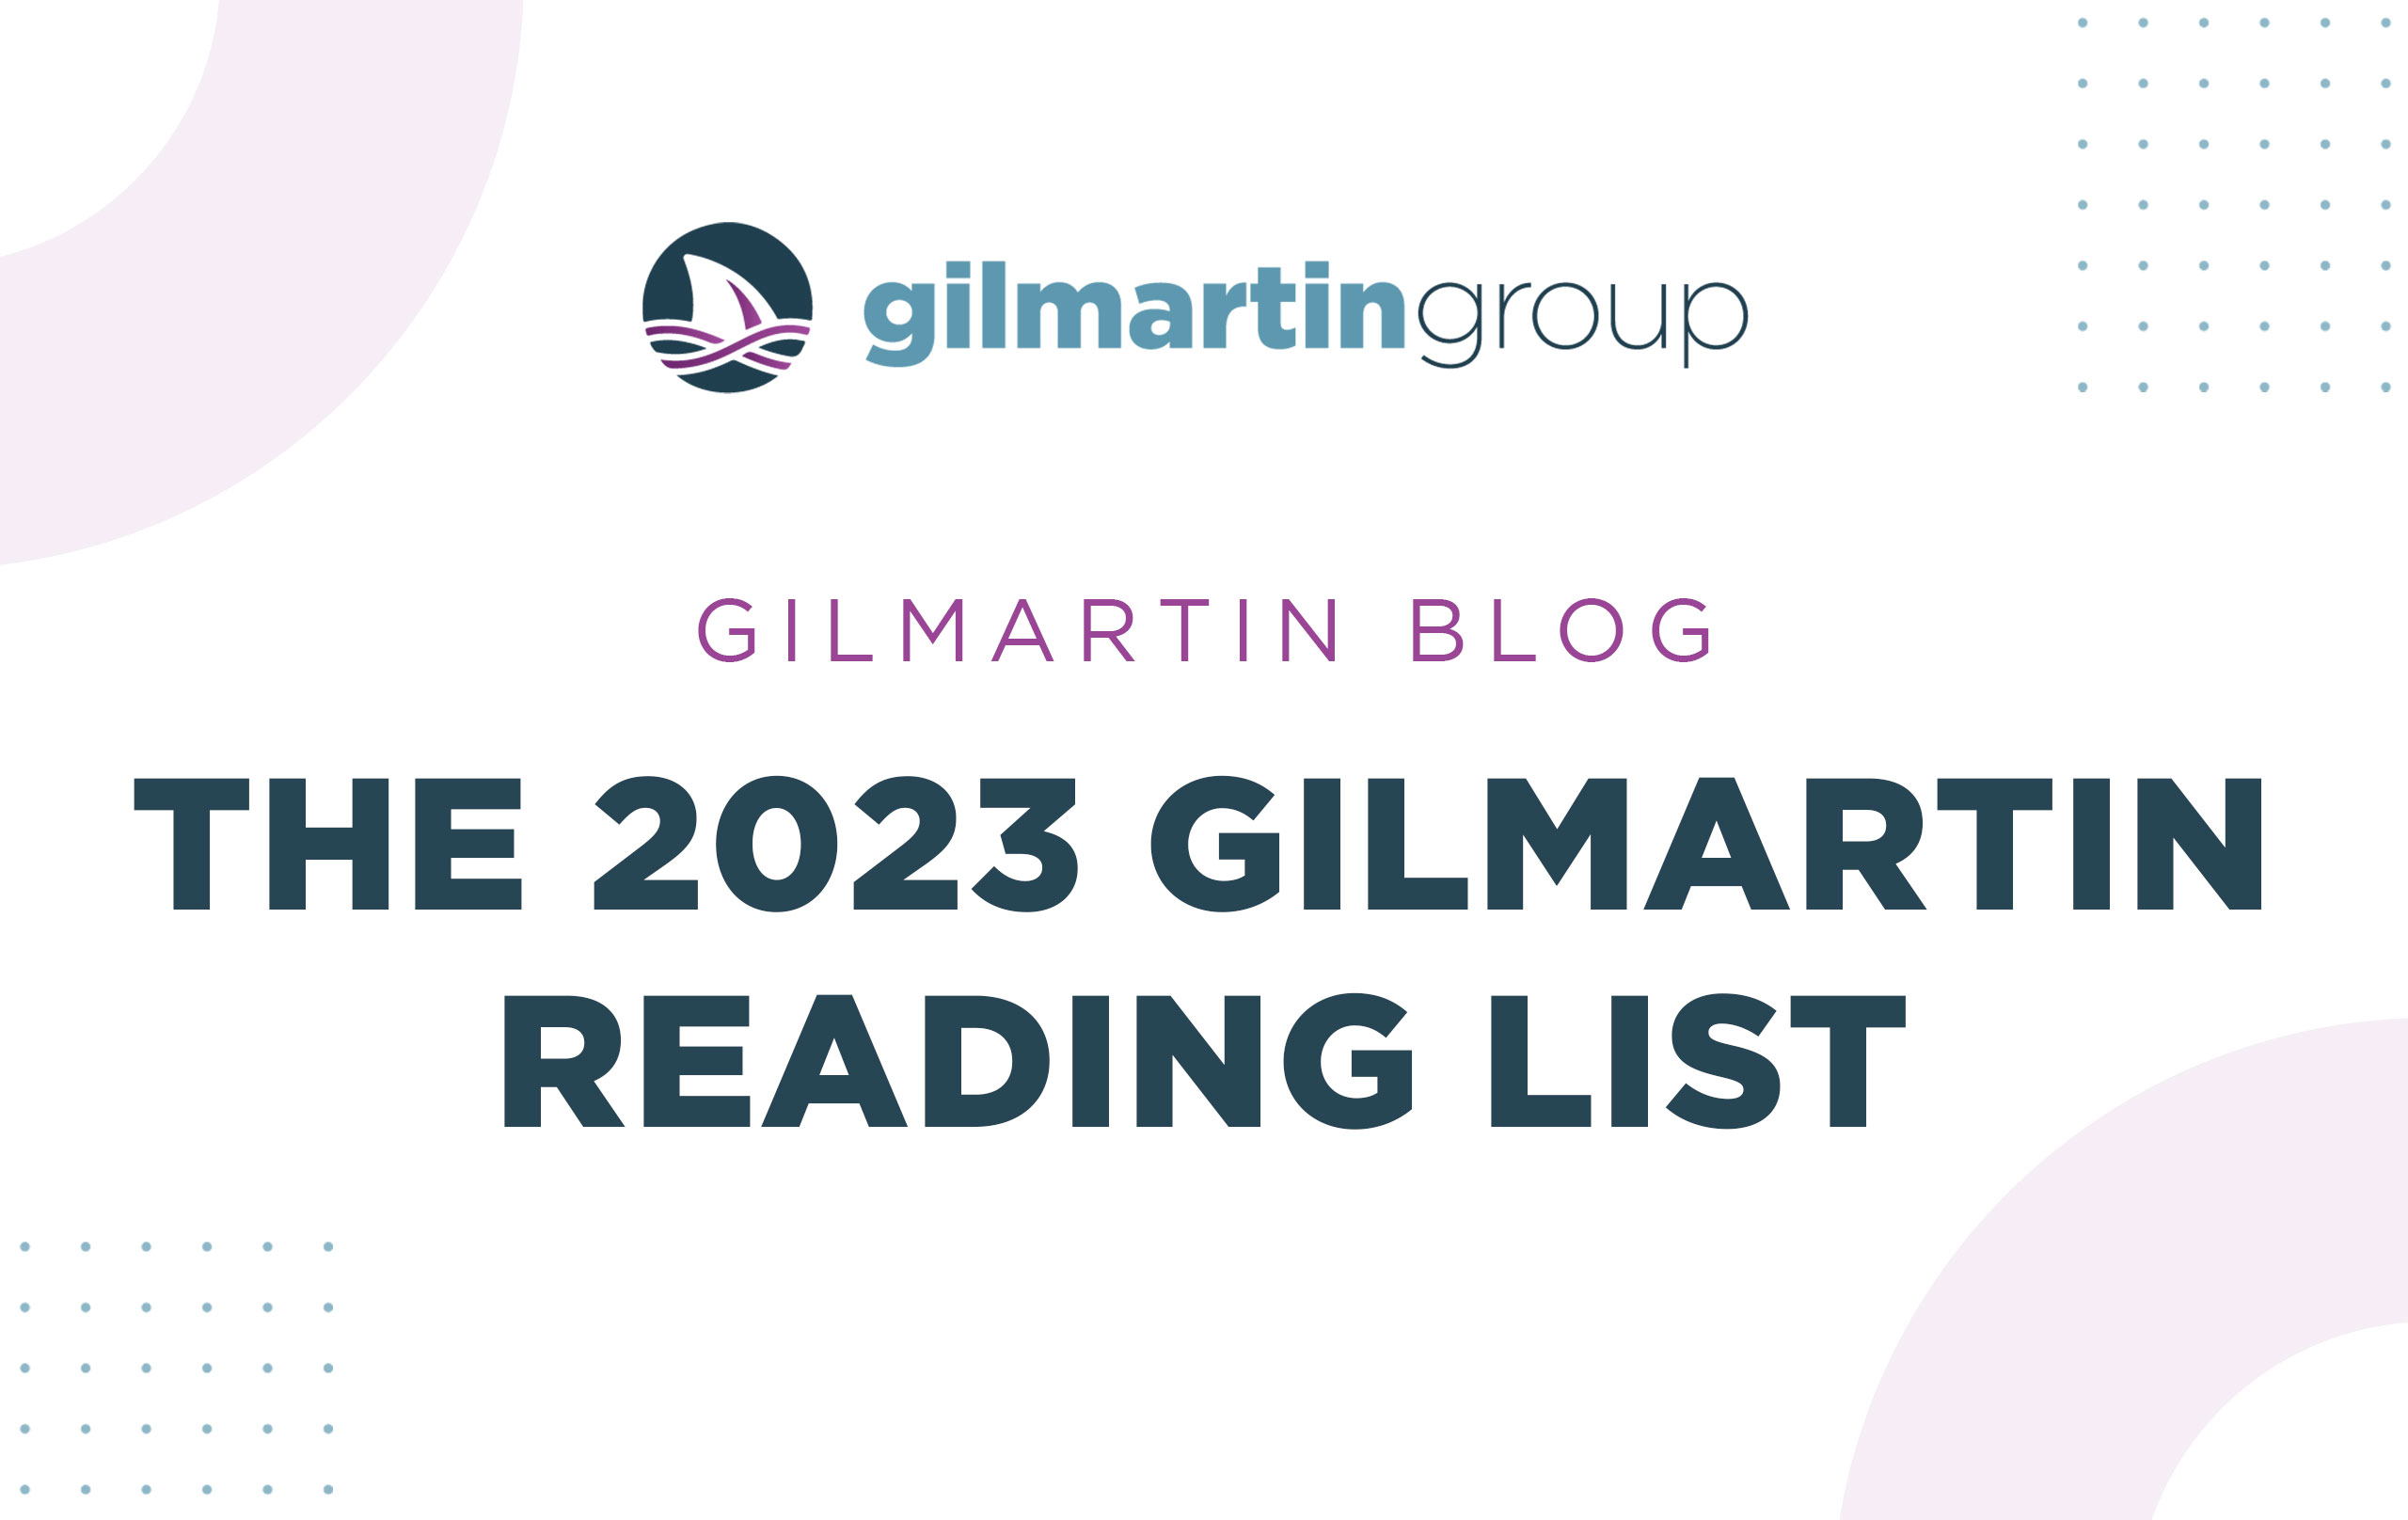 image for The 2023 Gilmartin Reading List